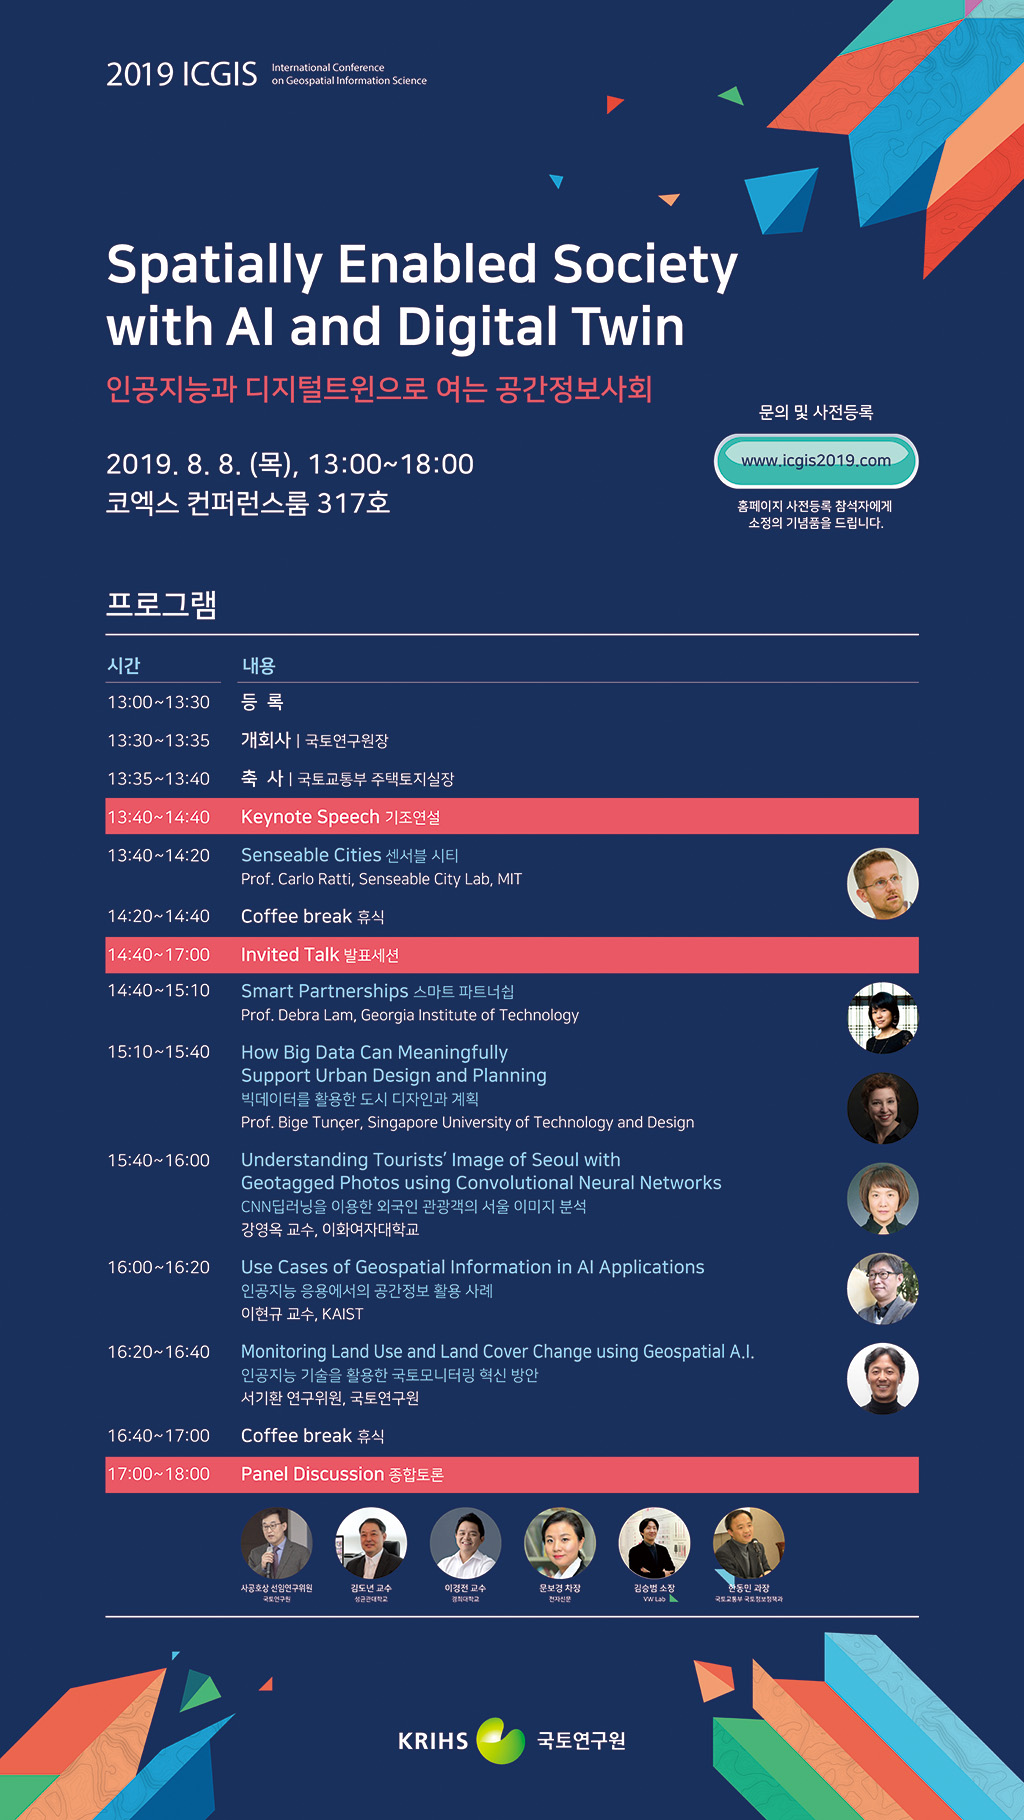 You are currently viewing 공간정보 국제컨퍼런스 ICGIS 2019 “Spatially Enabled Society with AI and Digital Twin” 개최 안내